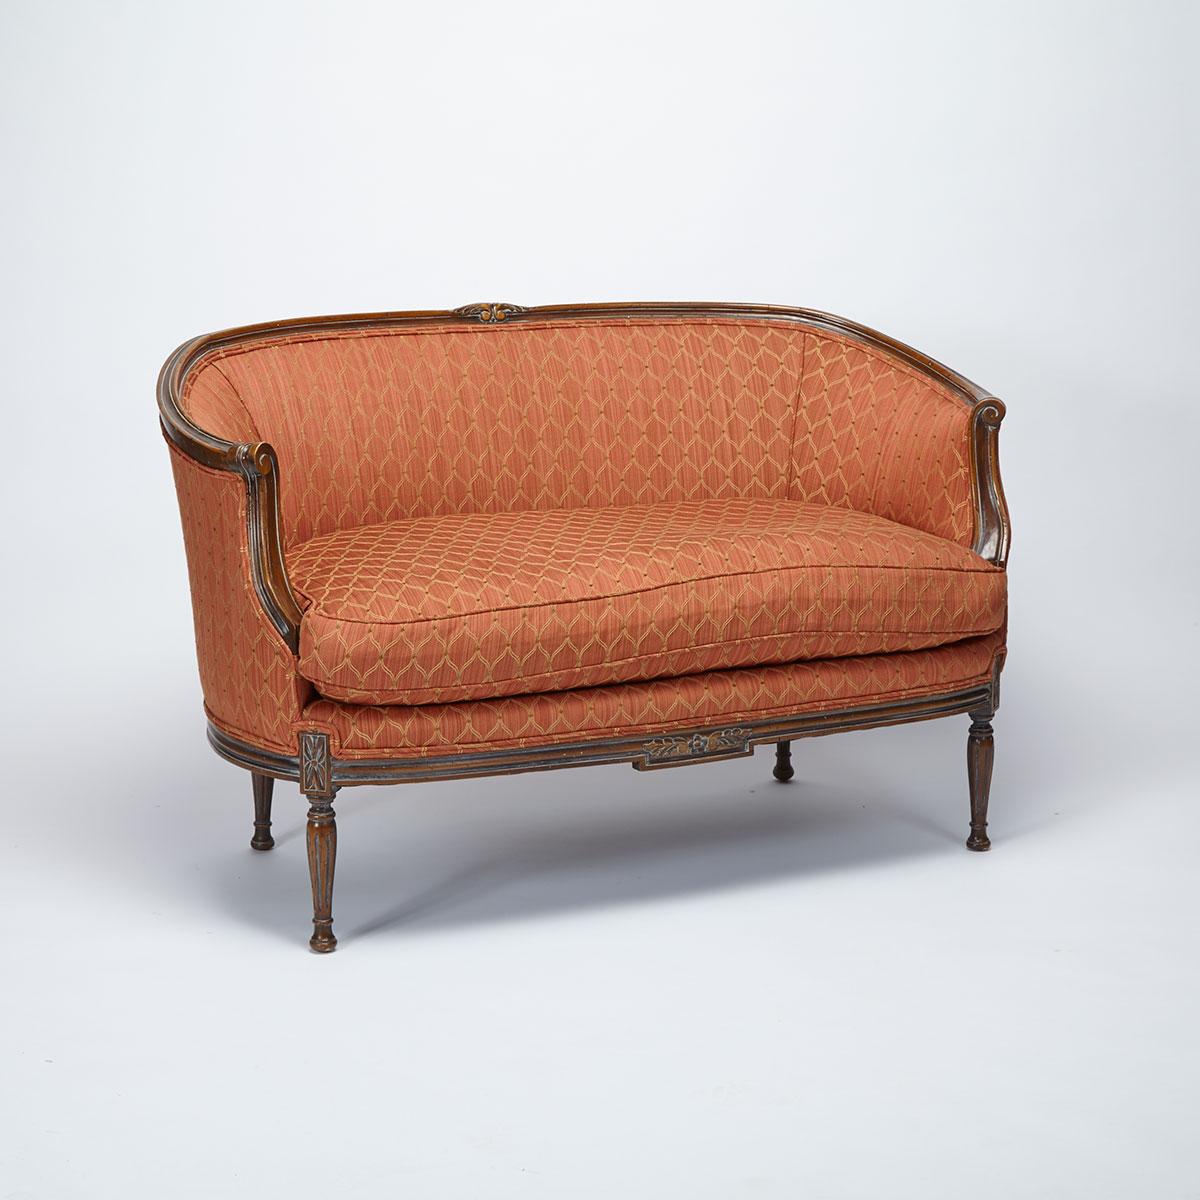 Small French Provincial Walnut Settee, 19th century